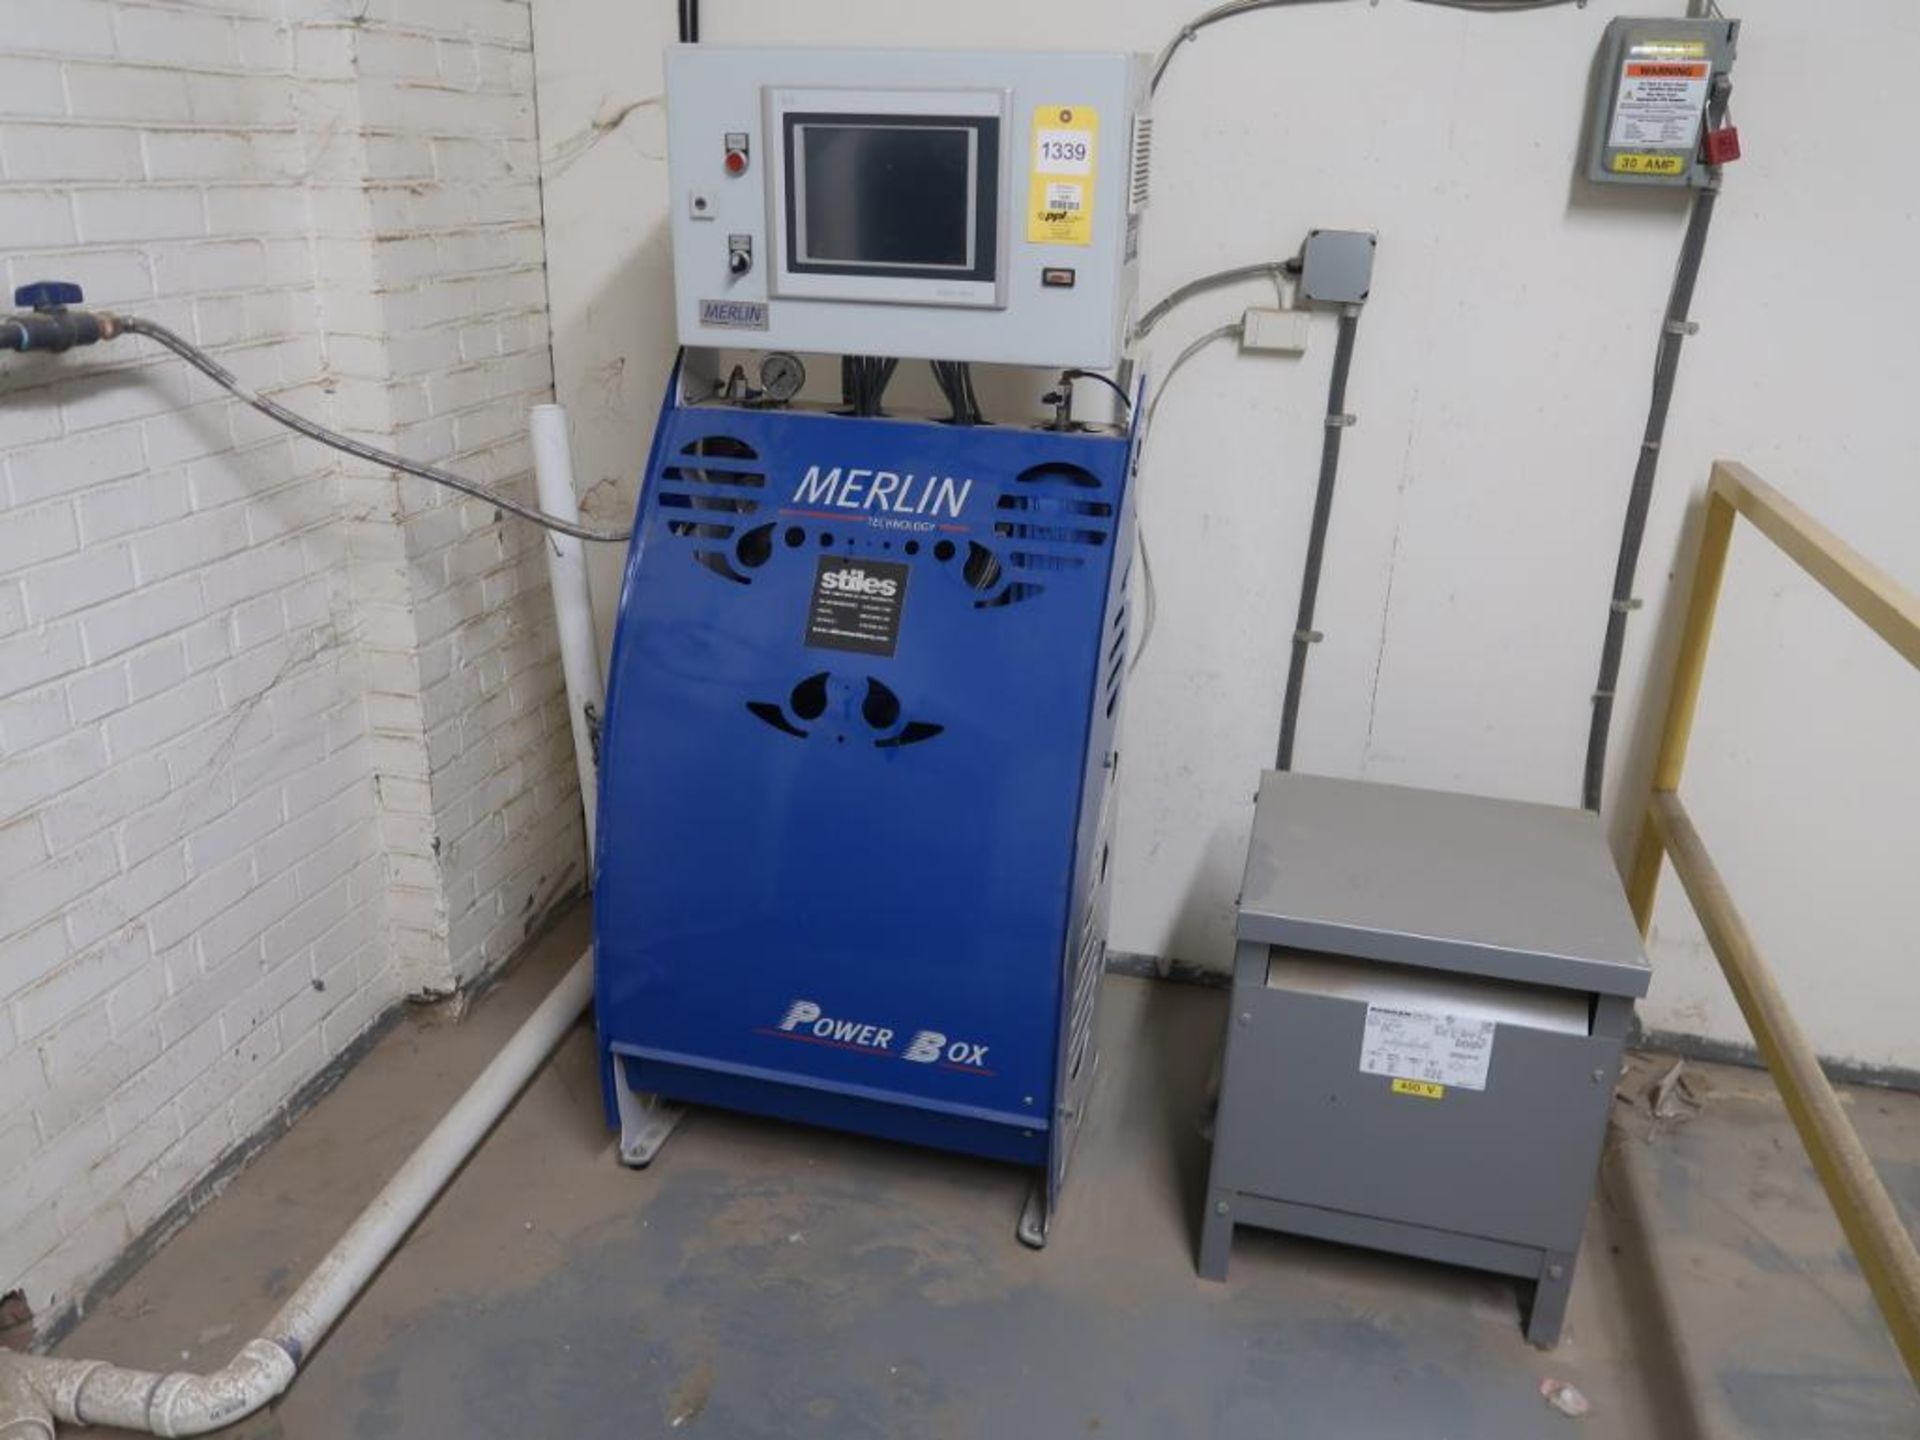 MERLIN Auto Humidification System Model 50-MS-MZ6-10/800-CB200-001, S/N SPS-MZ6-90/6-11-10-749, with - Image 2 of 5